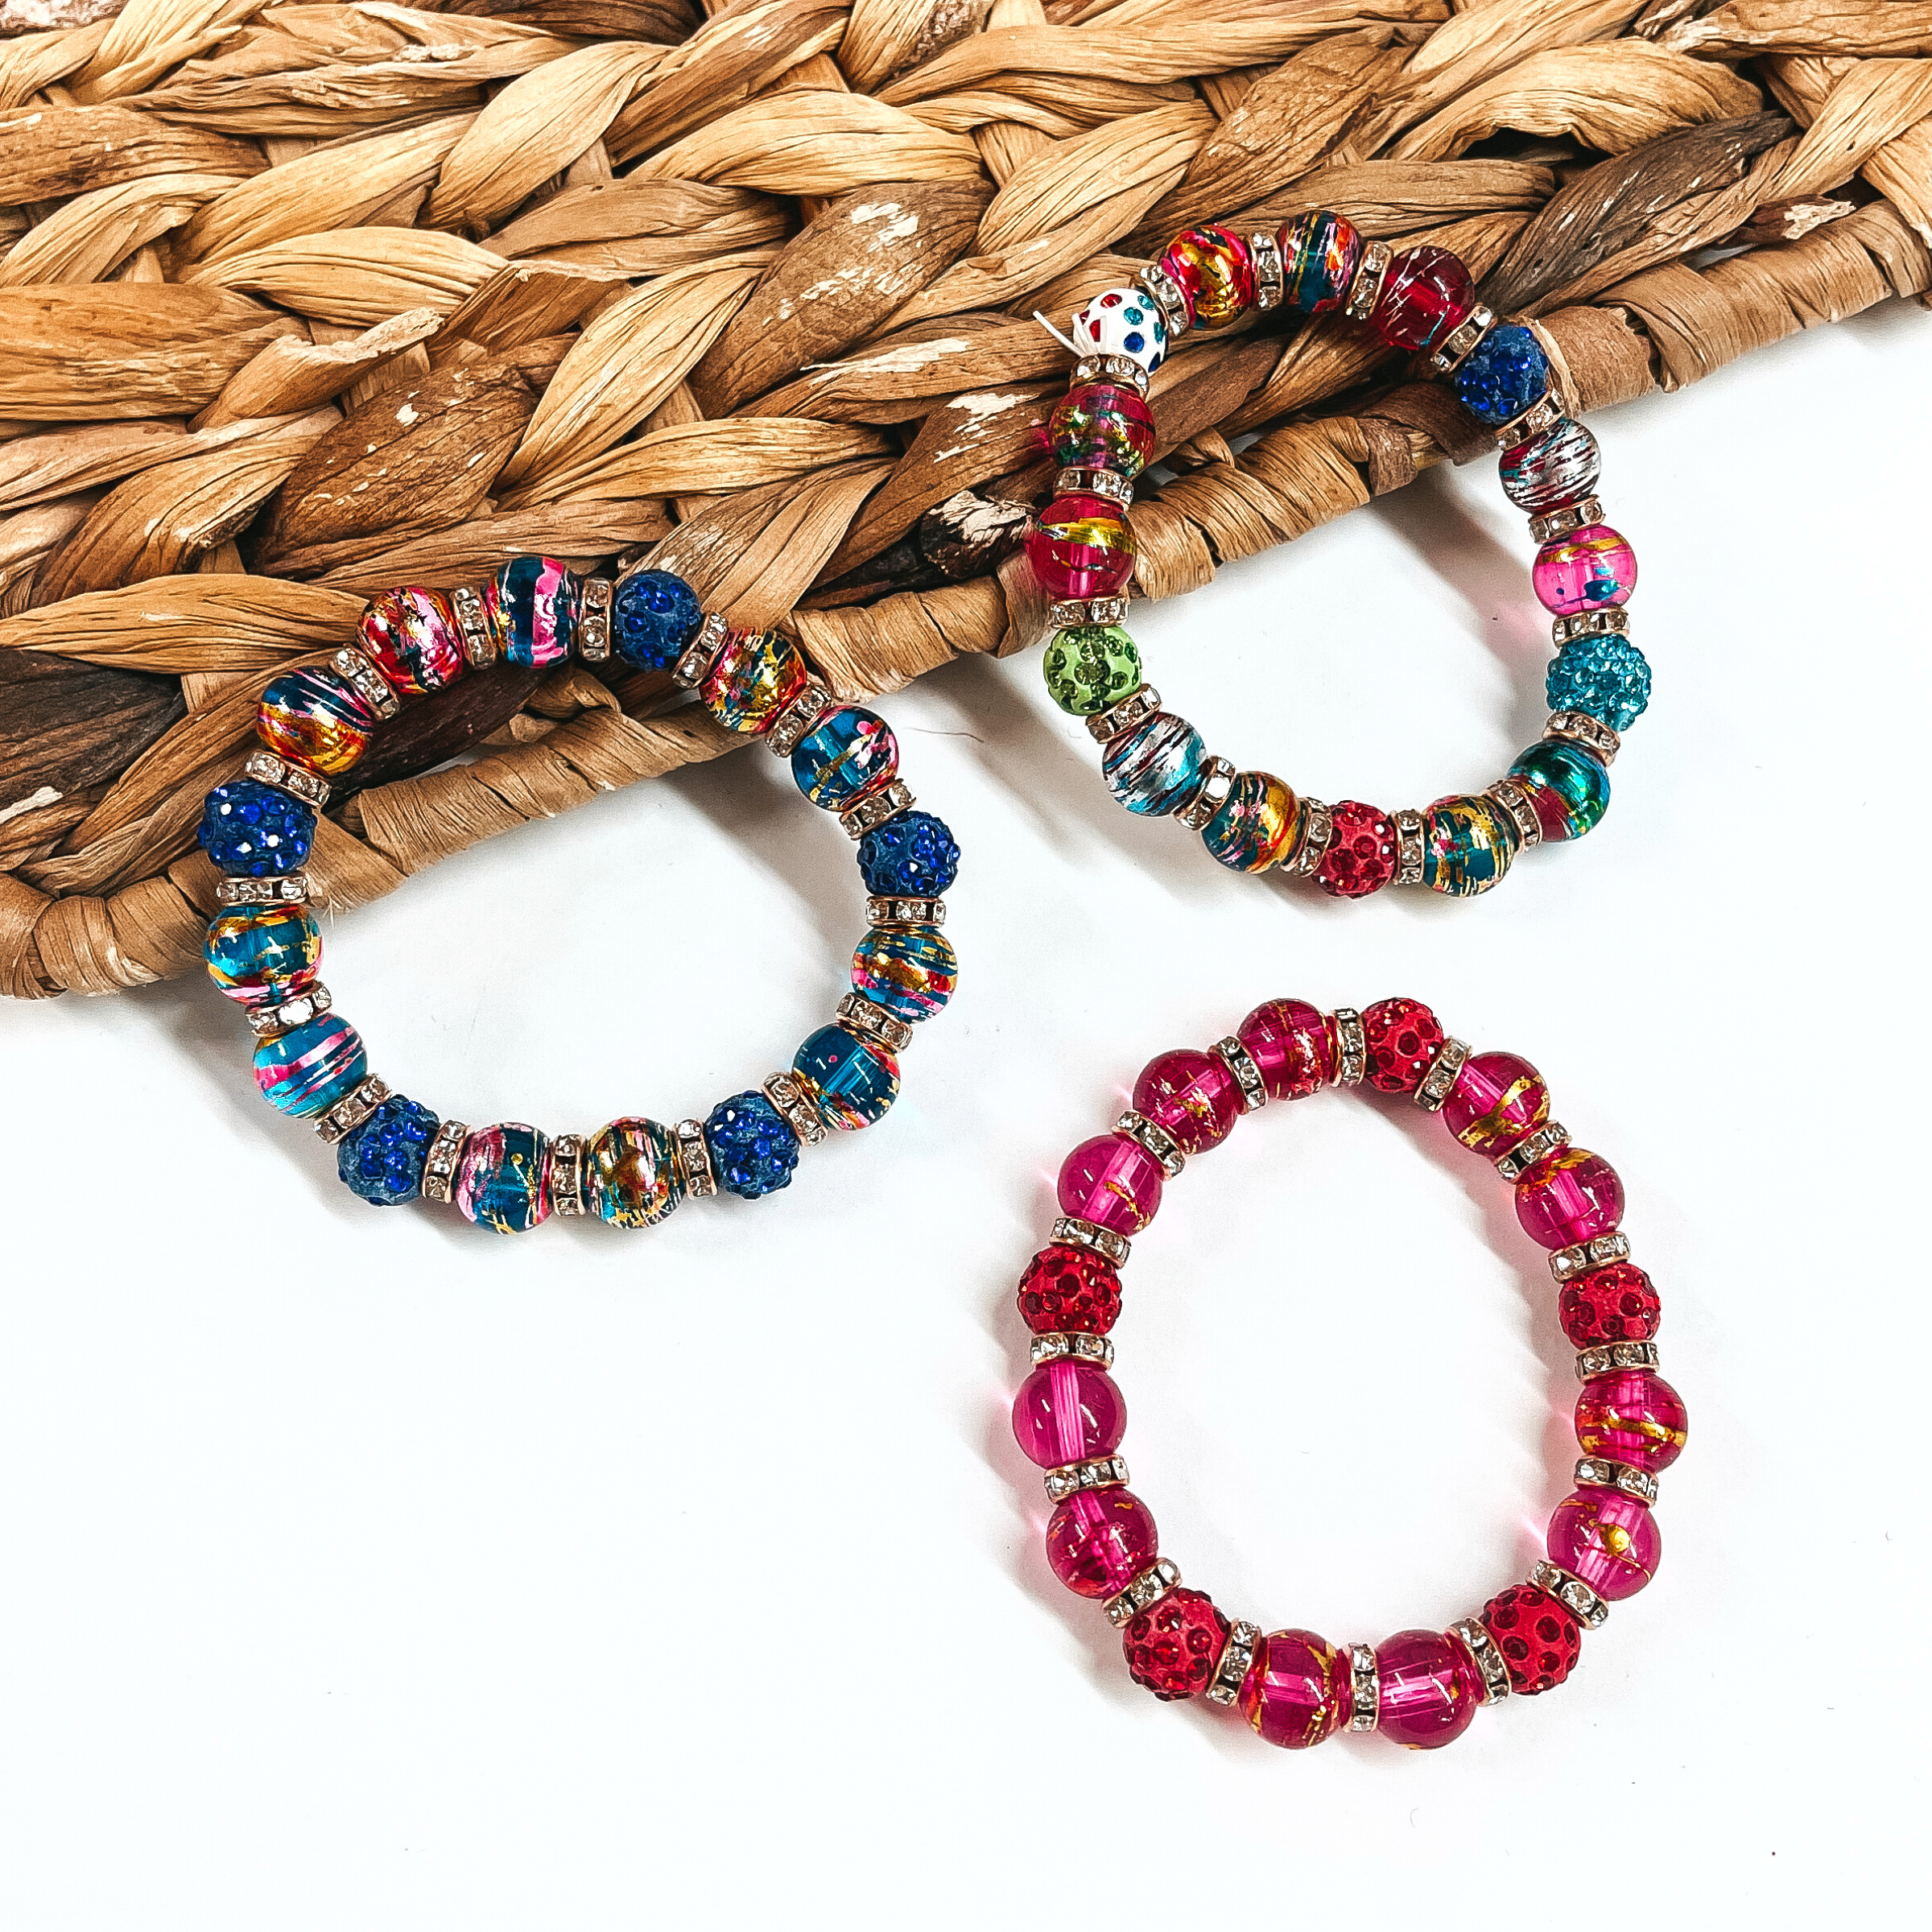 There are three multicolored beaded bracelets with crystals. the left one is a blue mix with crystals, the right one is multicolored mix with crystals, and the bottom one is red/pink mix with crystals. All three are laying on a brown woven slate and a white background.